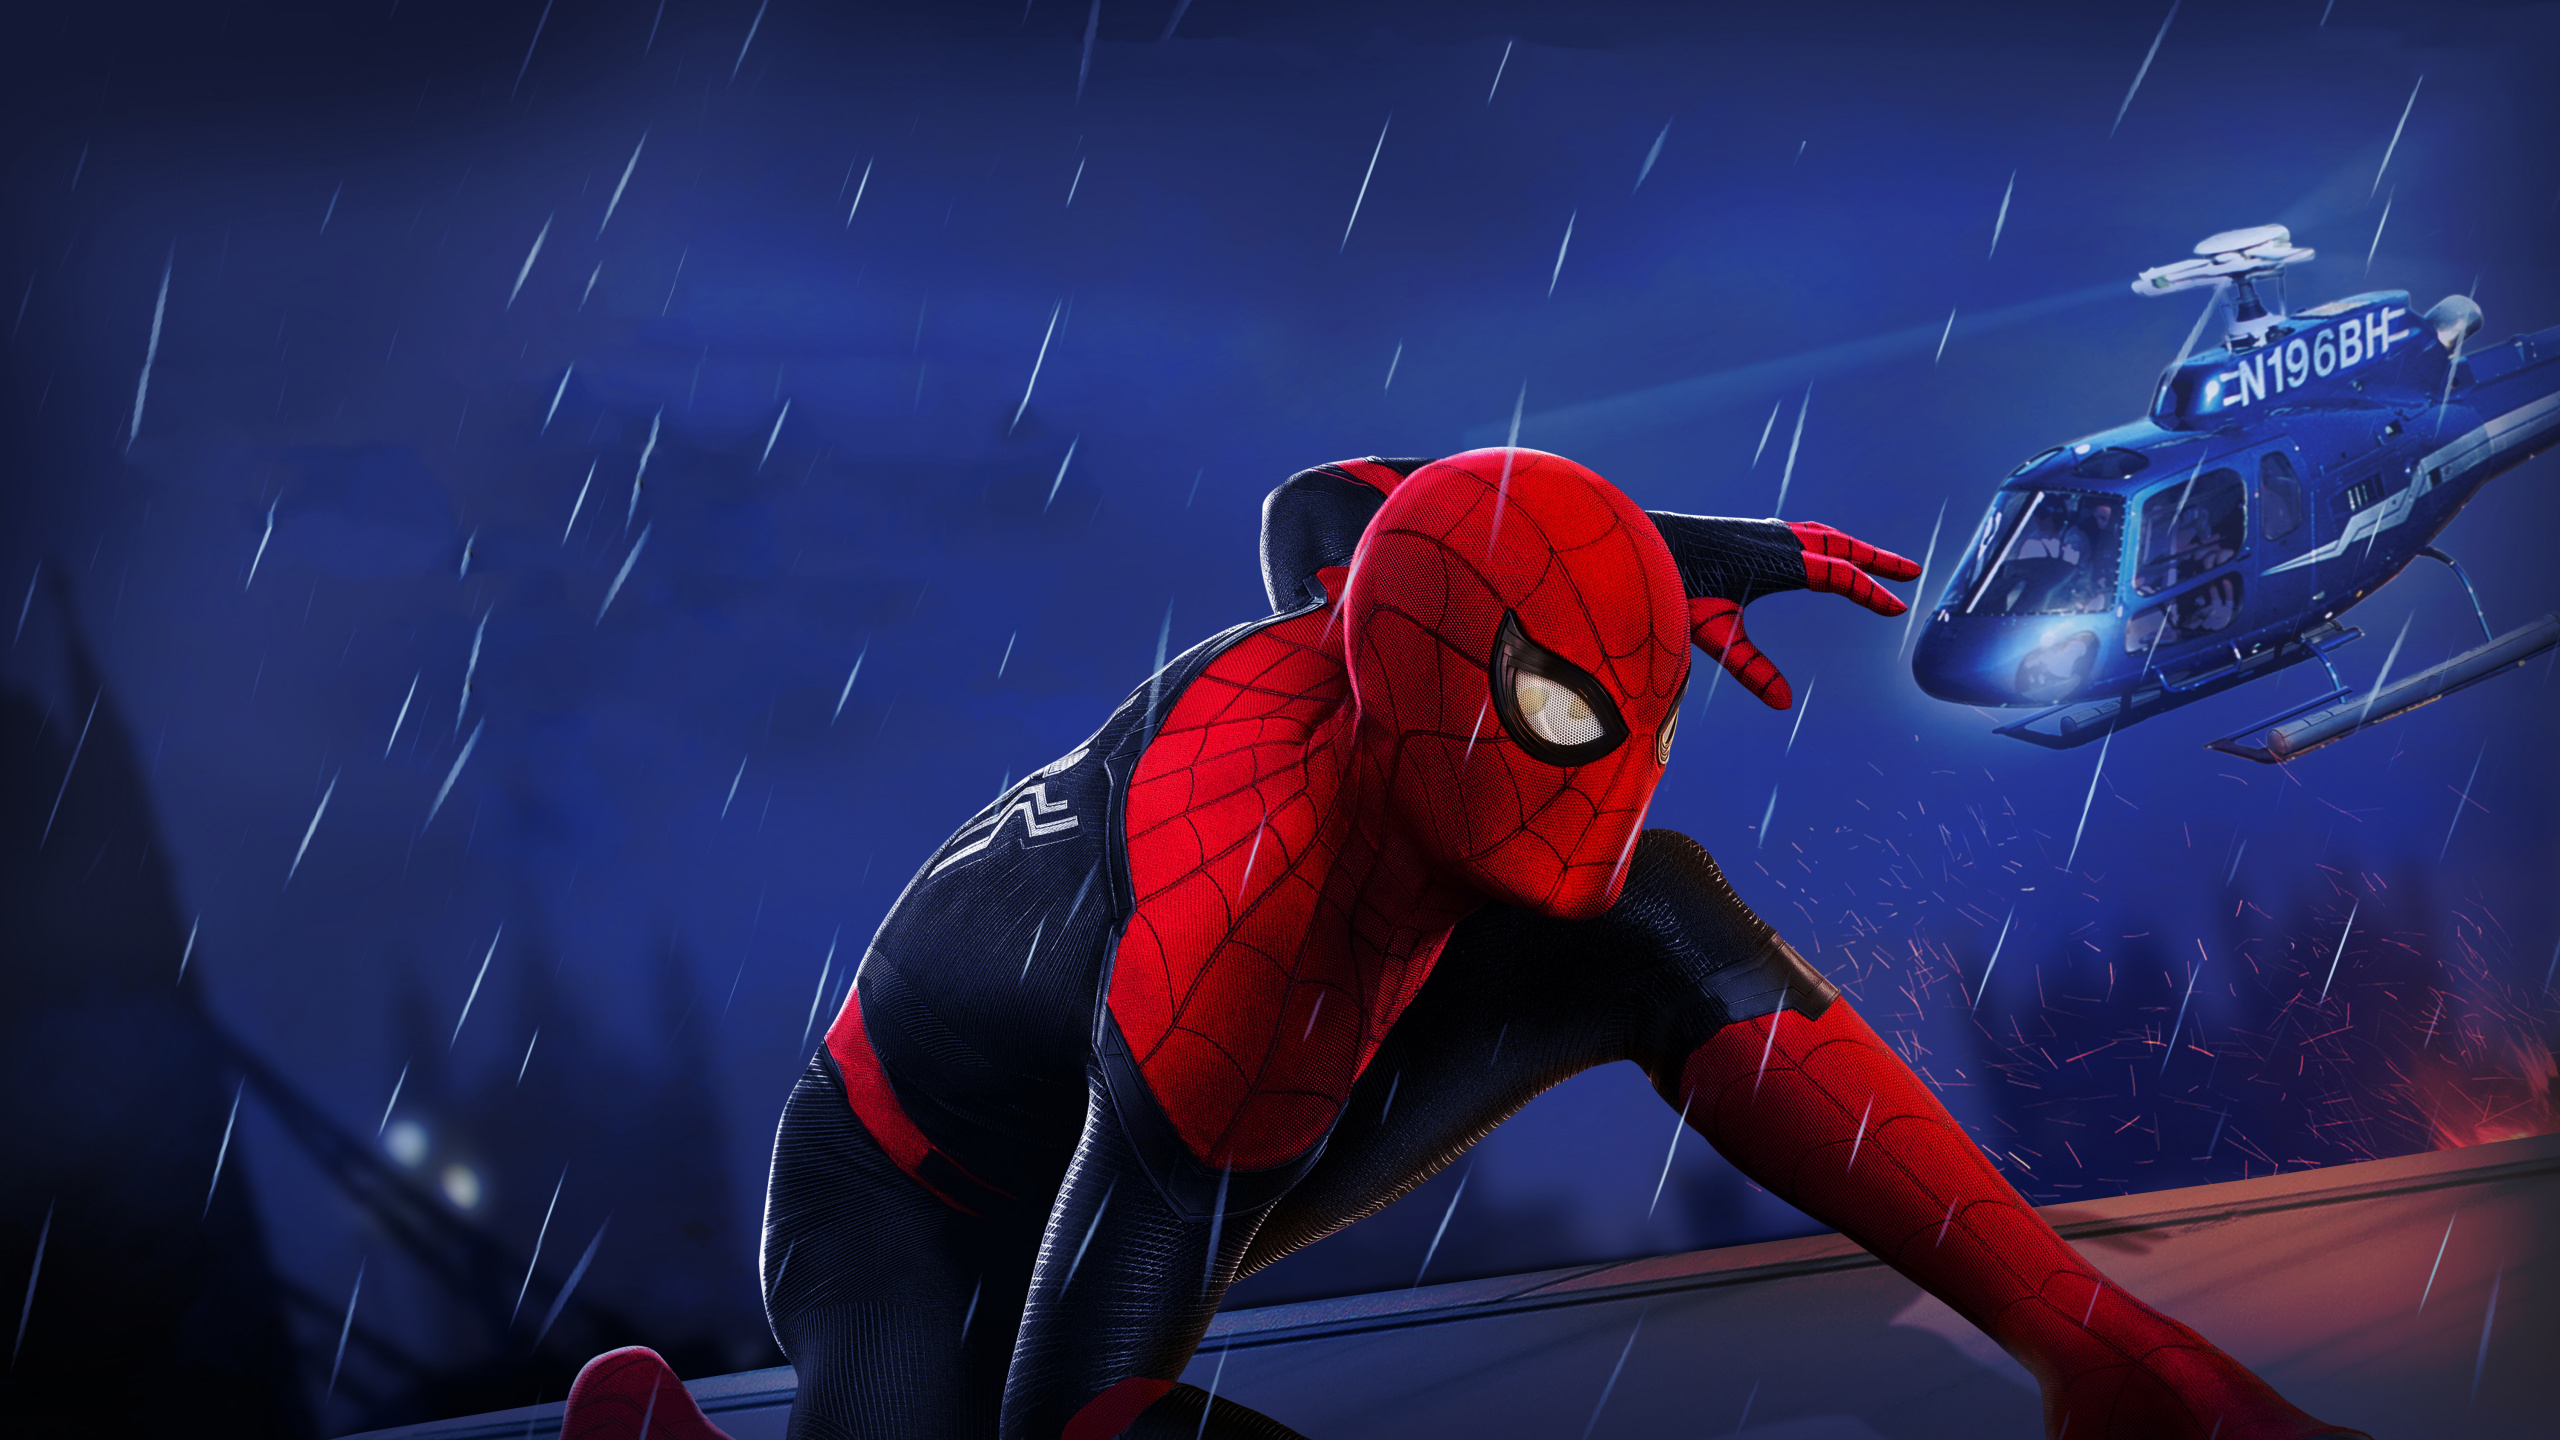 Red and Black Spider Man. Wallpaper in 2560x1440 Resolution